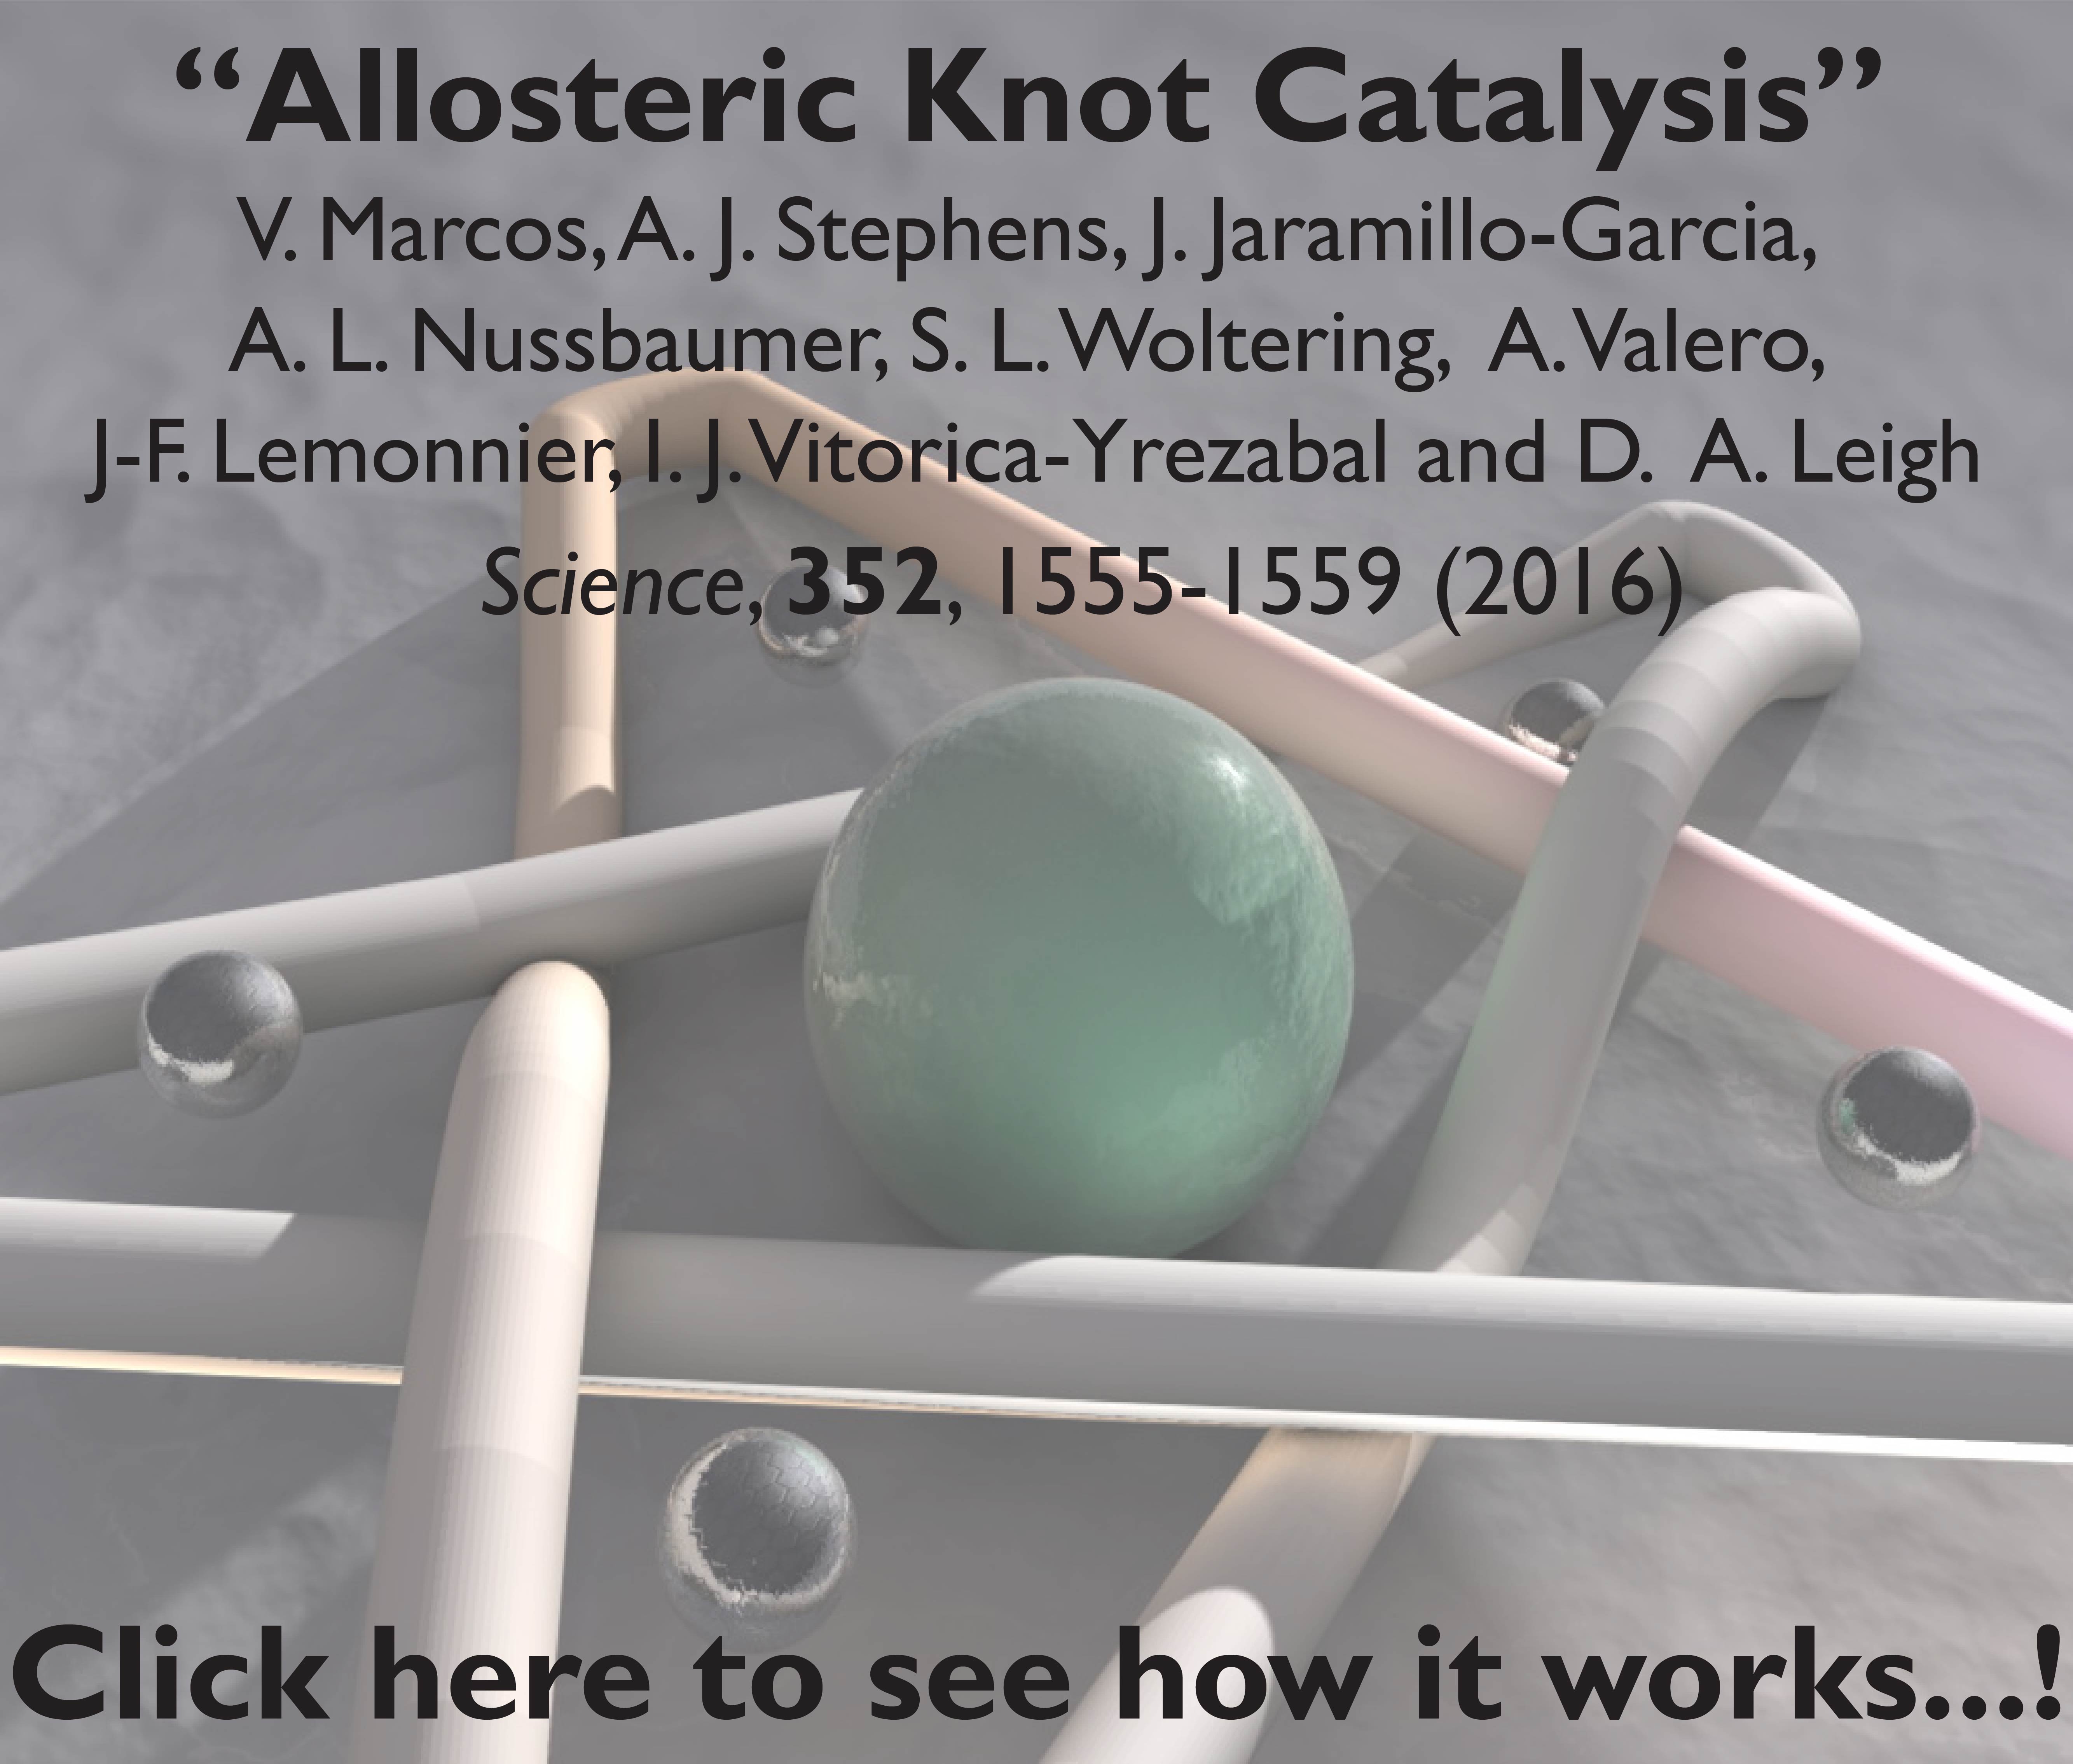 Allosteric Knot Catalysis